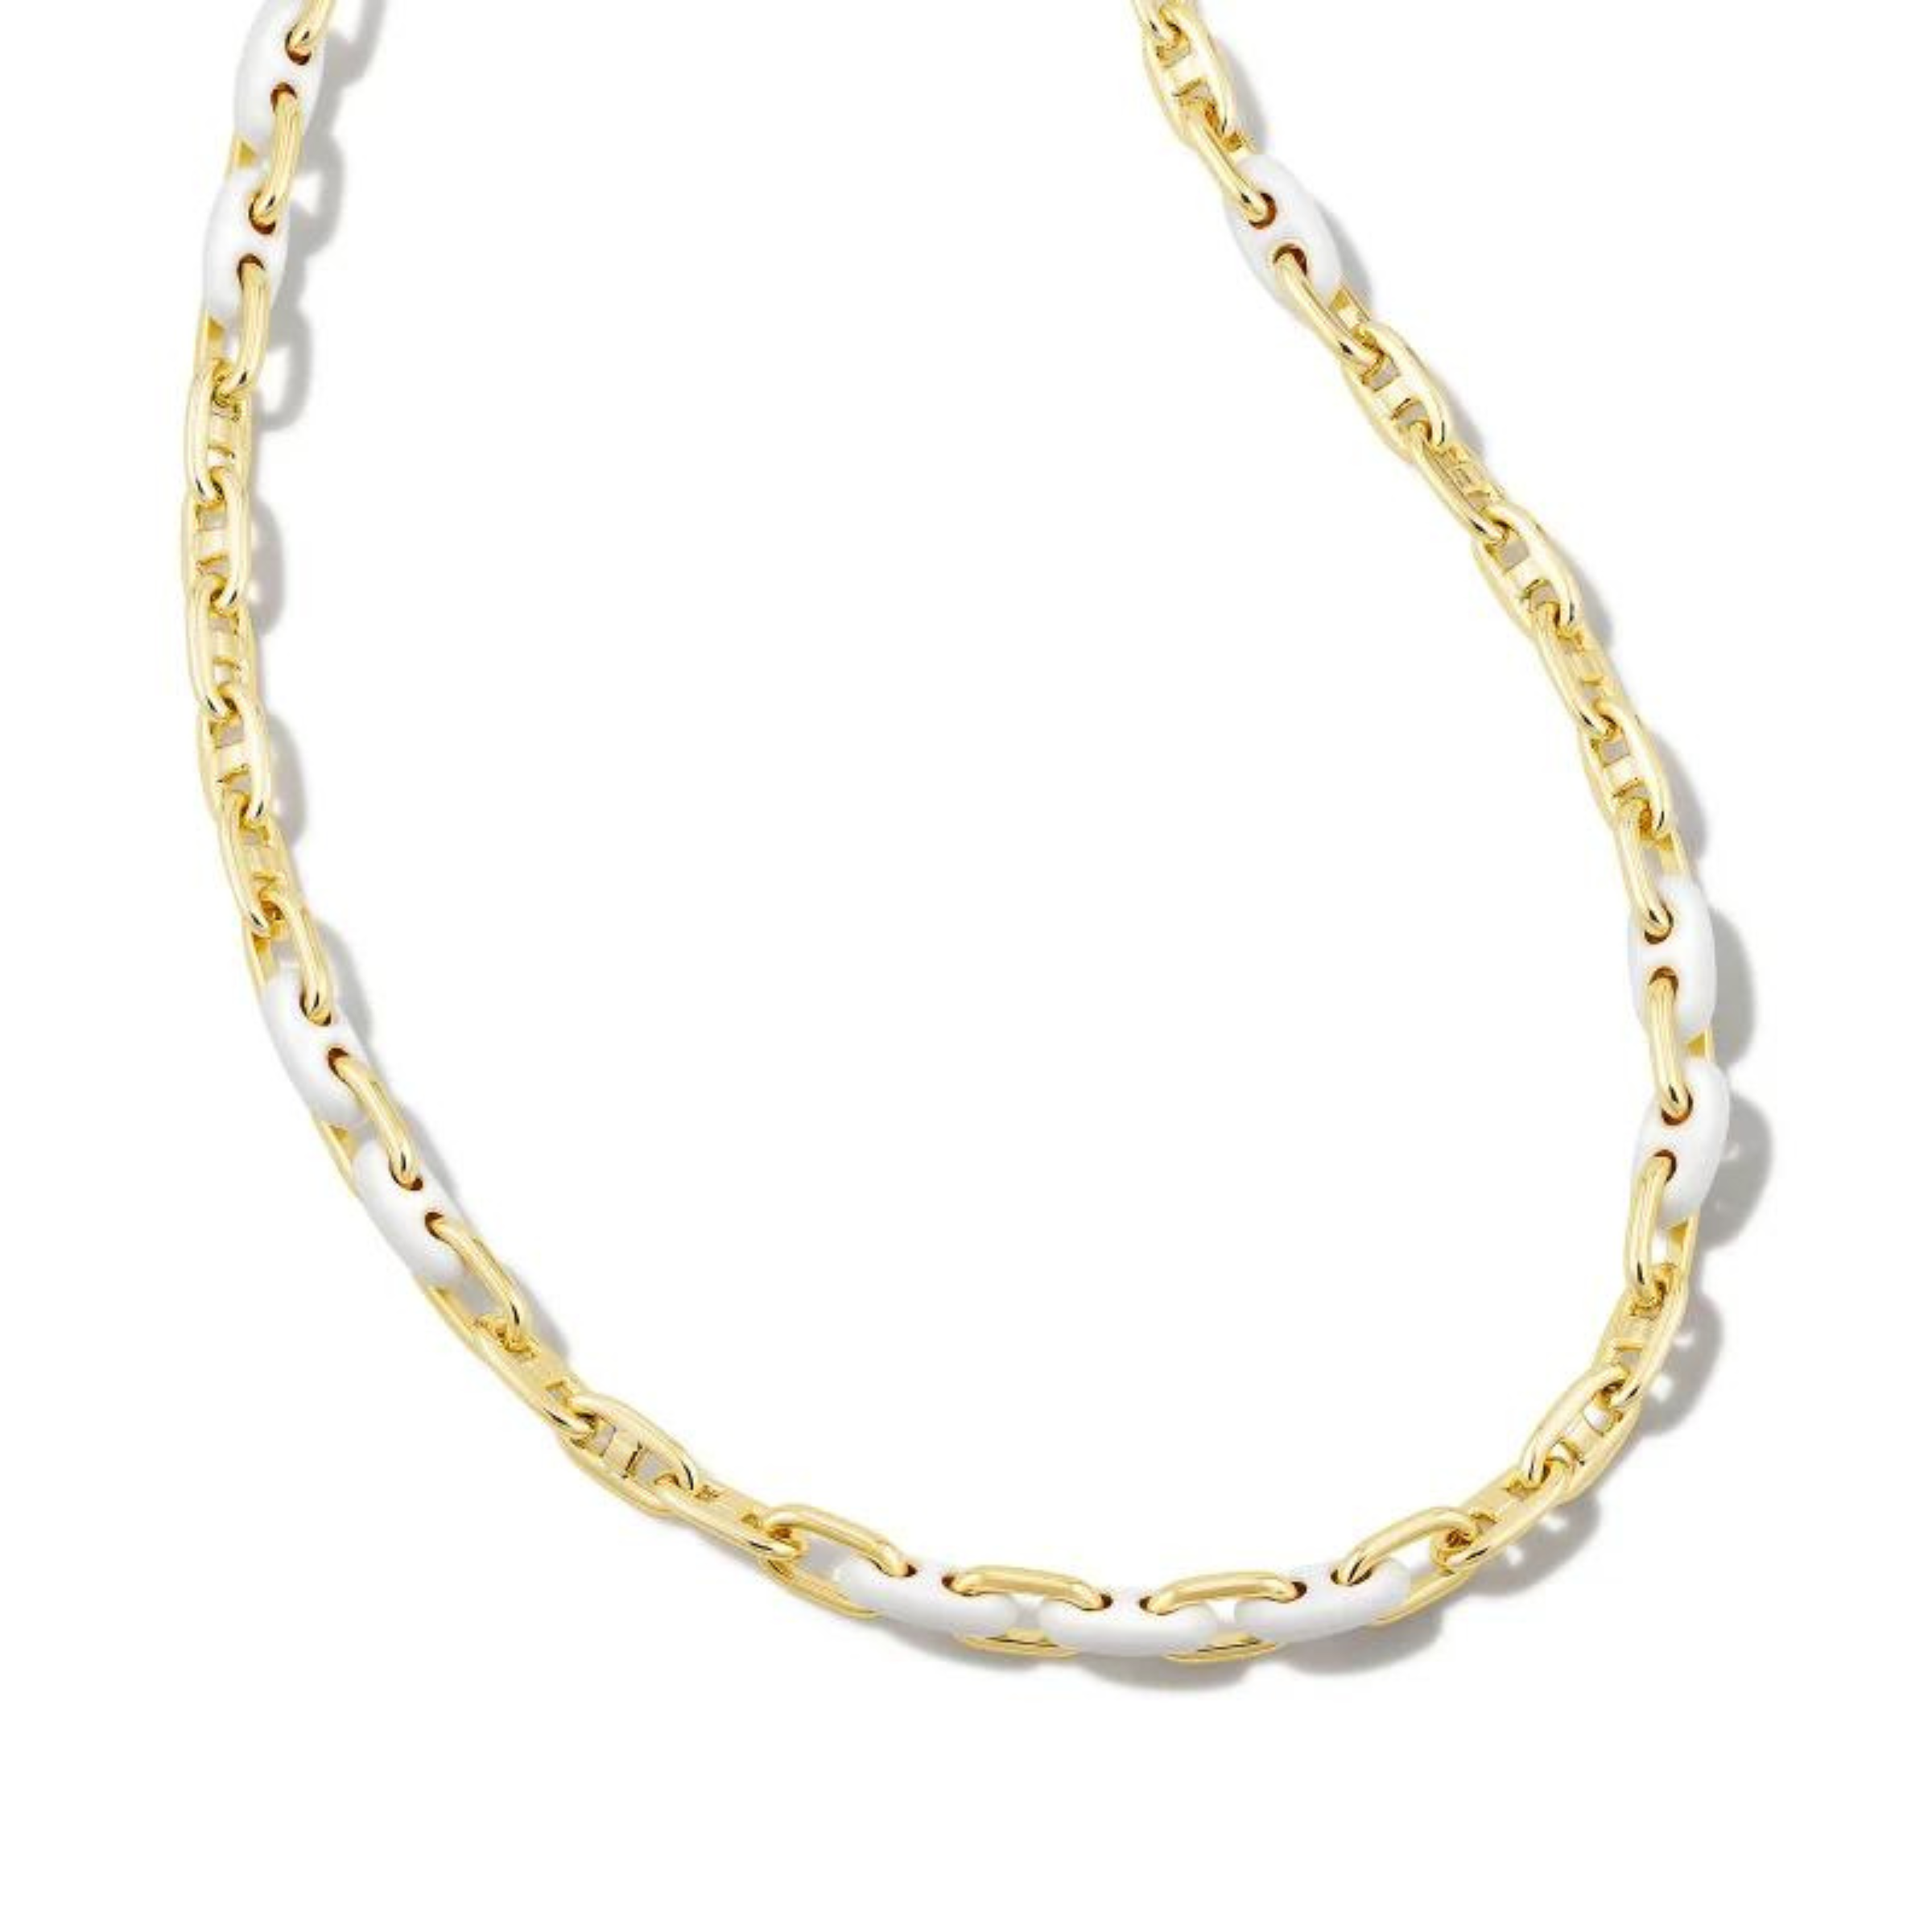 Kendra Scott | Bailey Gold Chain Necklace in White Mix - Giddy Up Glamour Boutique